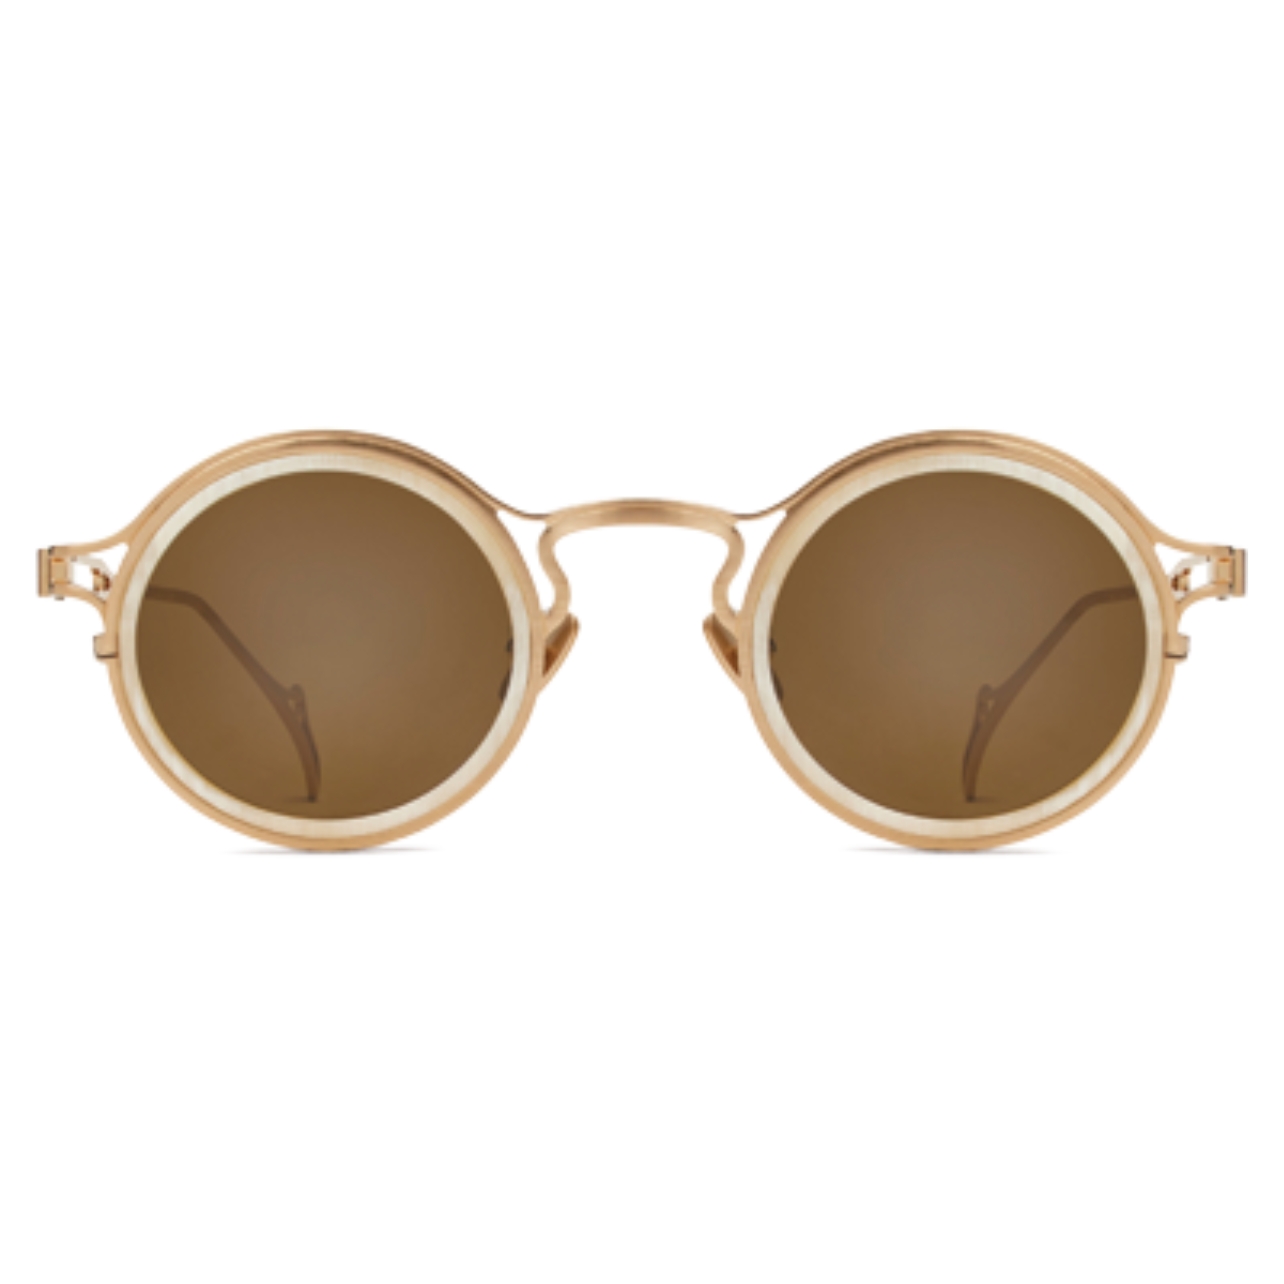 Morgenthal Frederics round sunglasses in gunmetal gold